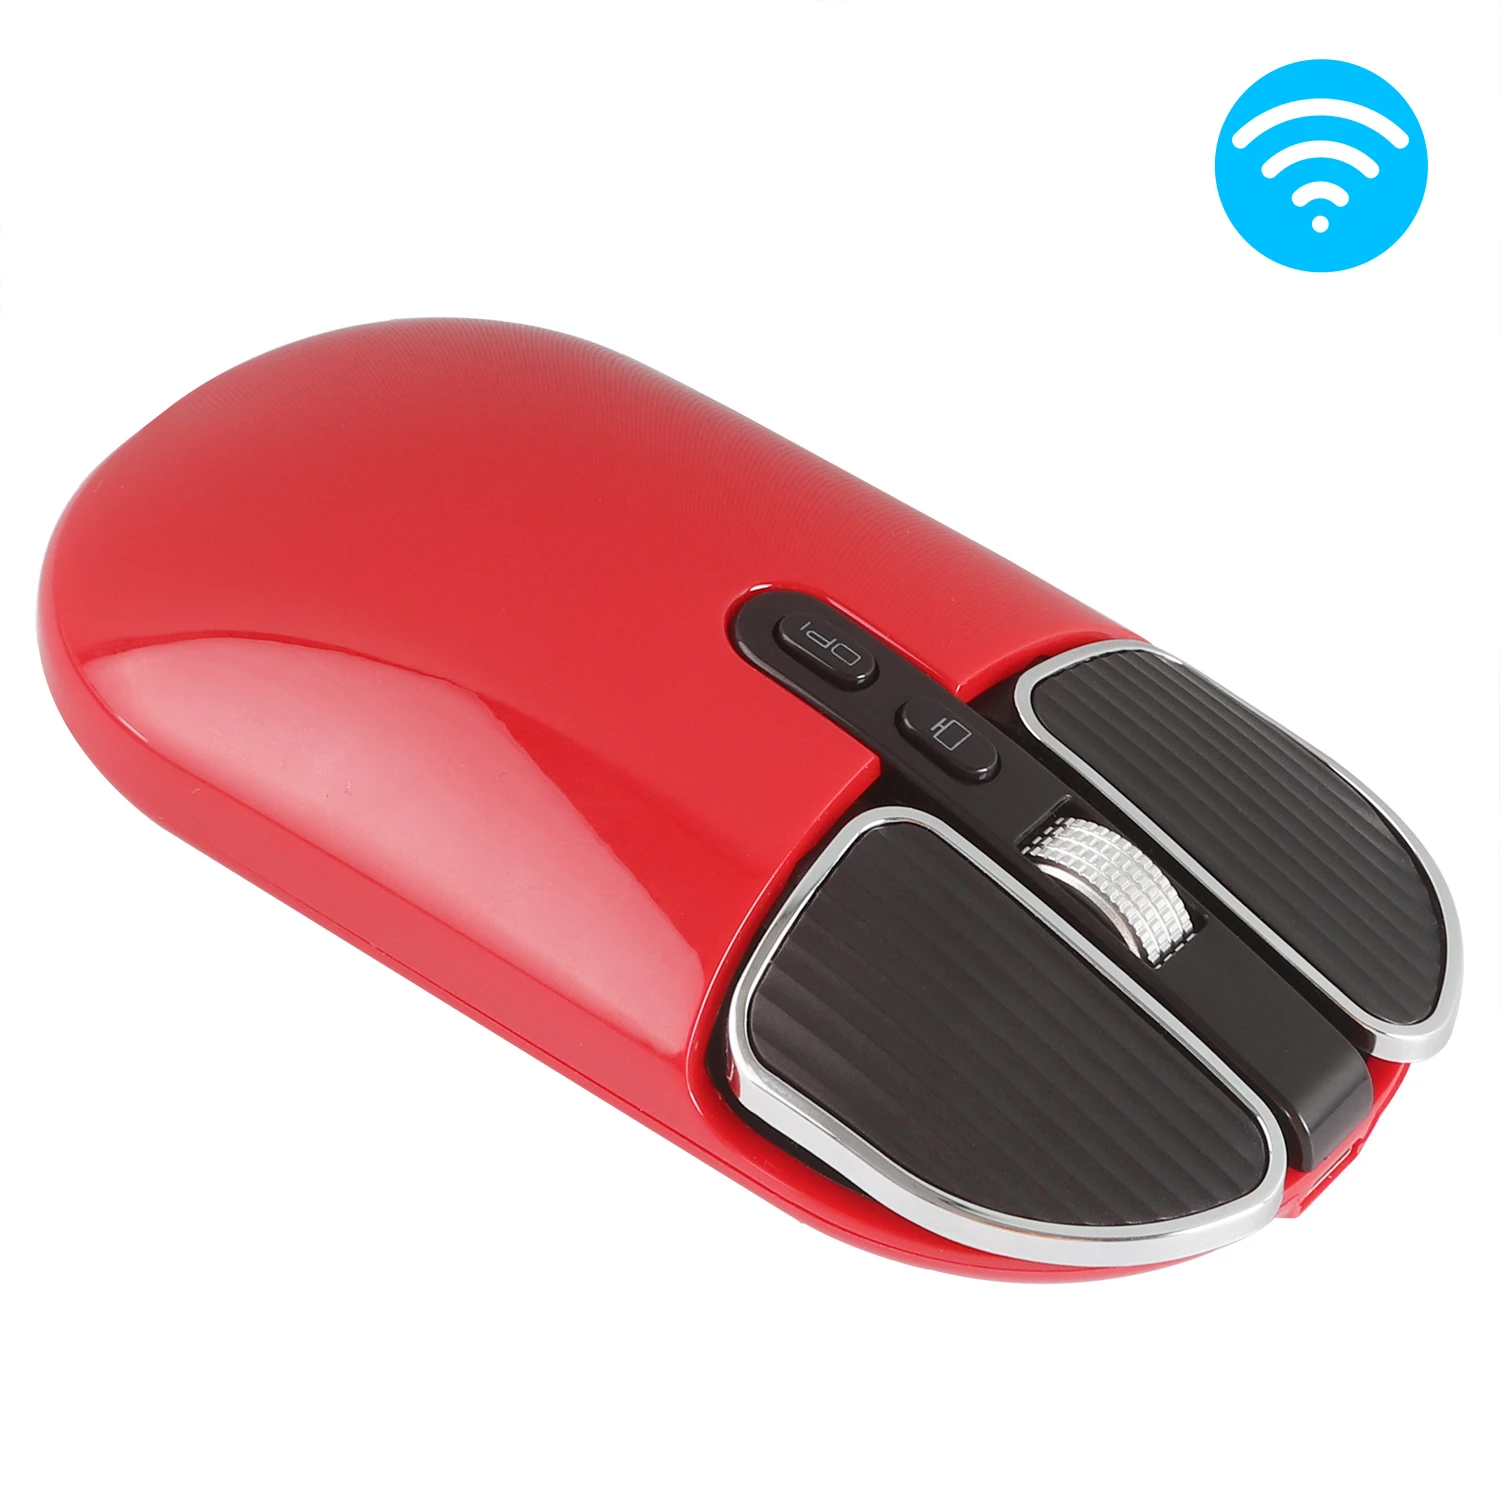 

Wireless 2.4G Mouse Beetle Rechargeable USB Cool Designed Computer Ergonomic Mause Optical Portable Fashion Mice For PC Laptop